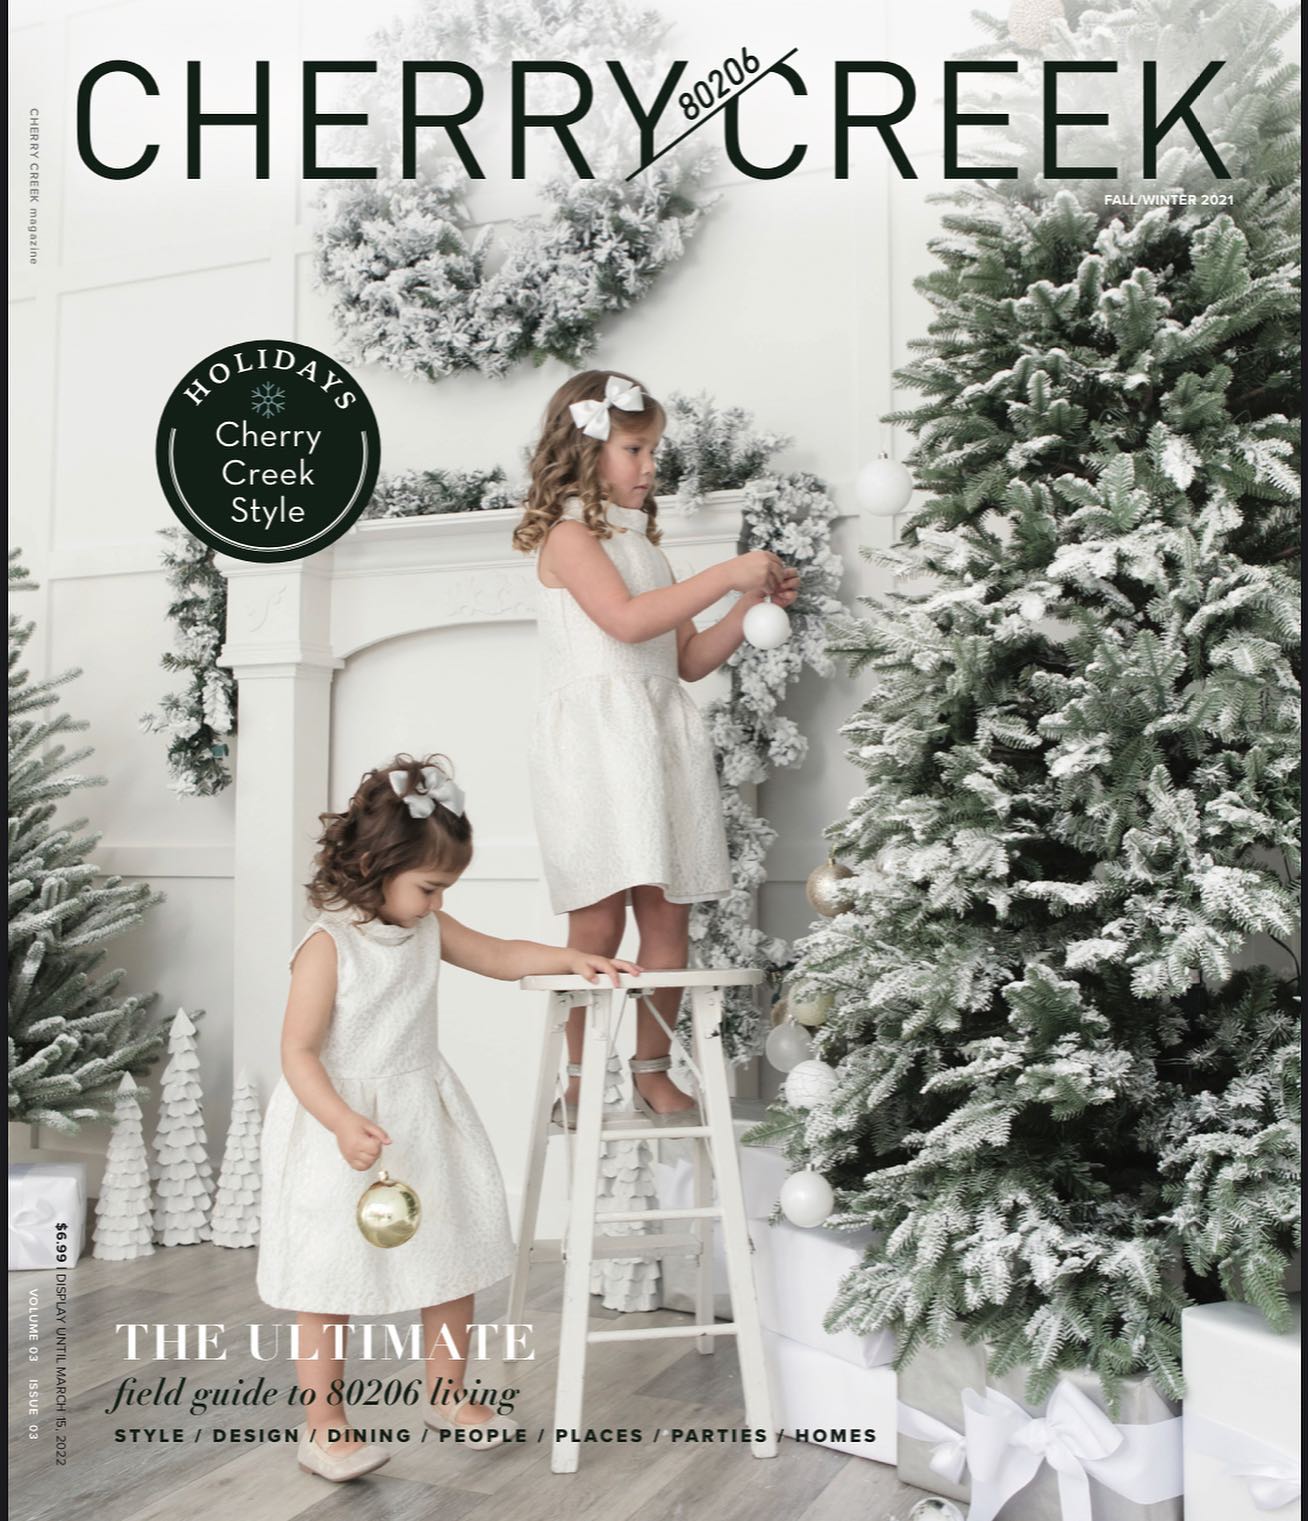 Our new issue has launched! Filled with gorgeous glossy pages highlighting the best of Cherry Creek, this edition showcases the neighborhood’s holiday happenings in style.  Link in bio to view online, or check your mailboxes for the print version. Cover photo + concept by the amazing Laura Esmond of Reese & Co Portraits. 
.
.
.
.
#cherrycreek #cherrycreekdenver #denvercolorado #cherrycreeknorth #denverstyle #denverevents #denverphotographer #smallbusiness #denverlocalbusiness #denverlove